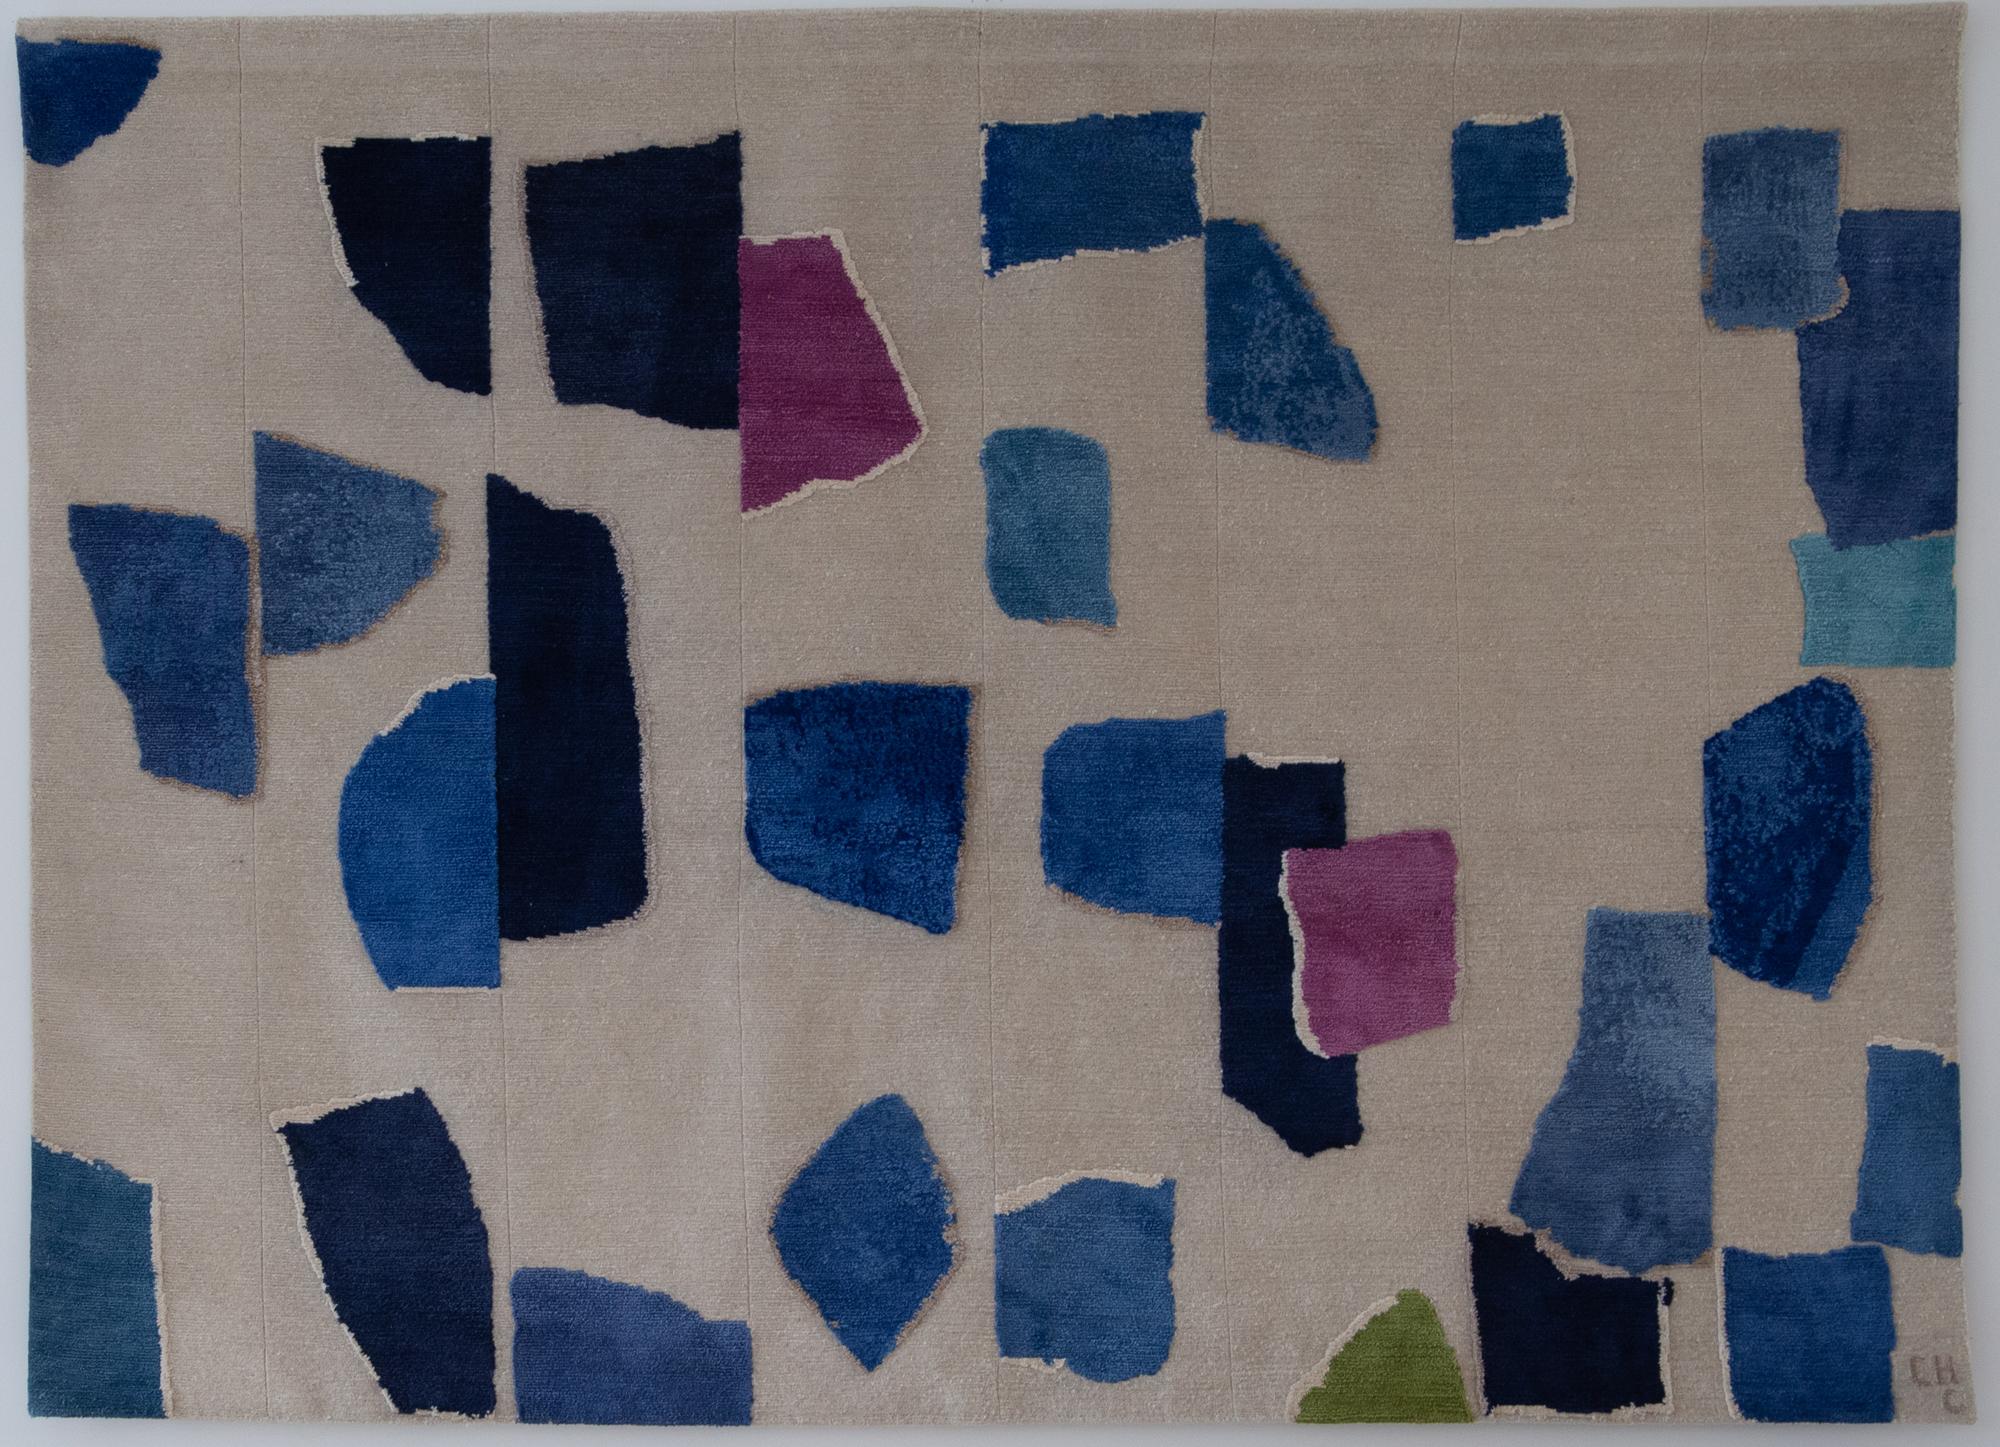 Rhizomes milky way blue hand knotted rug by Charlotte Culot
Edition: 8
Signed
Dimensions: 250 x 180 cm
Materials: Silk, wool, linen, allo
Hand knotted.

During a visit to Château La Coste in 2018 Charlotte Culot was inspired by a strikingly